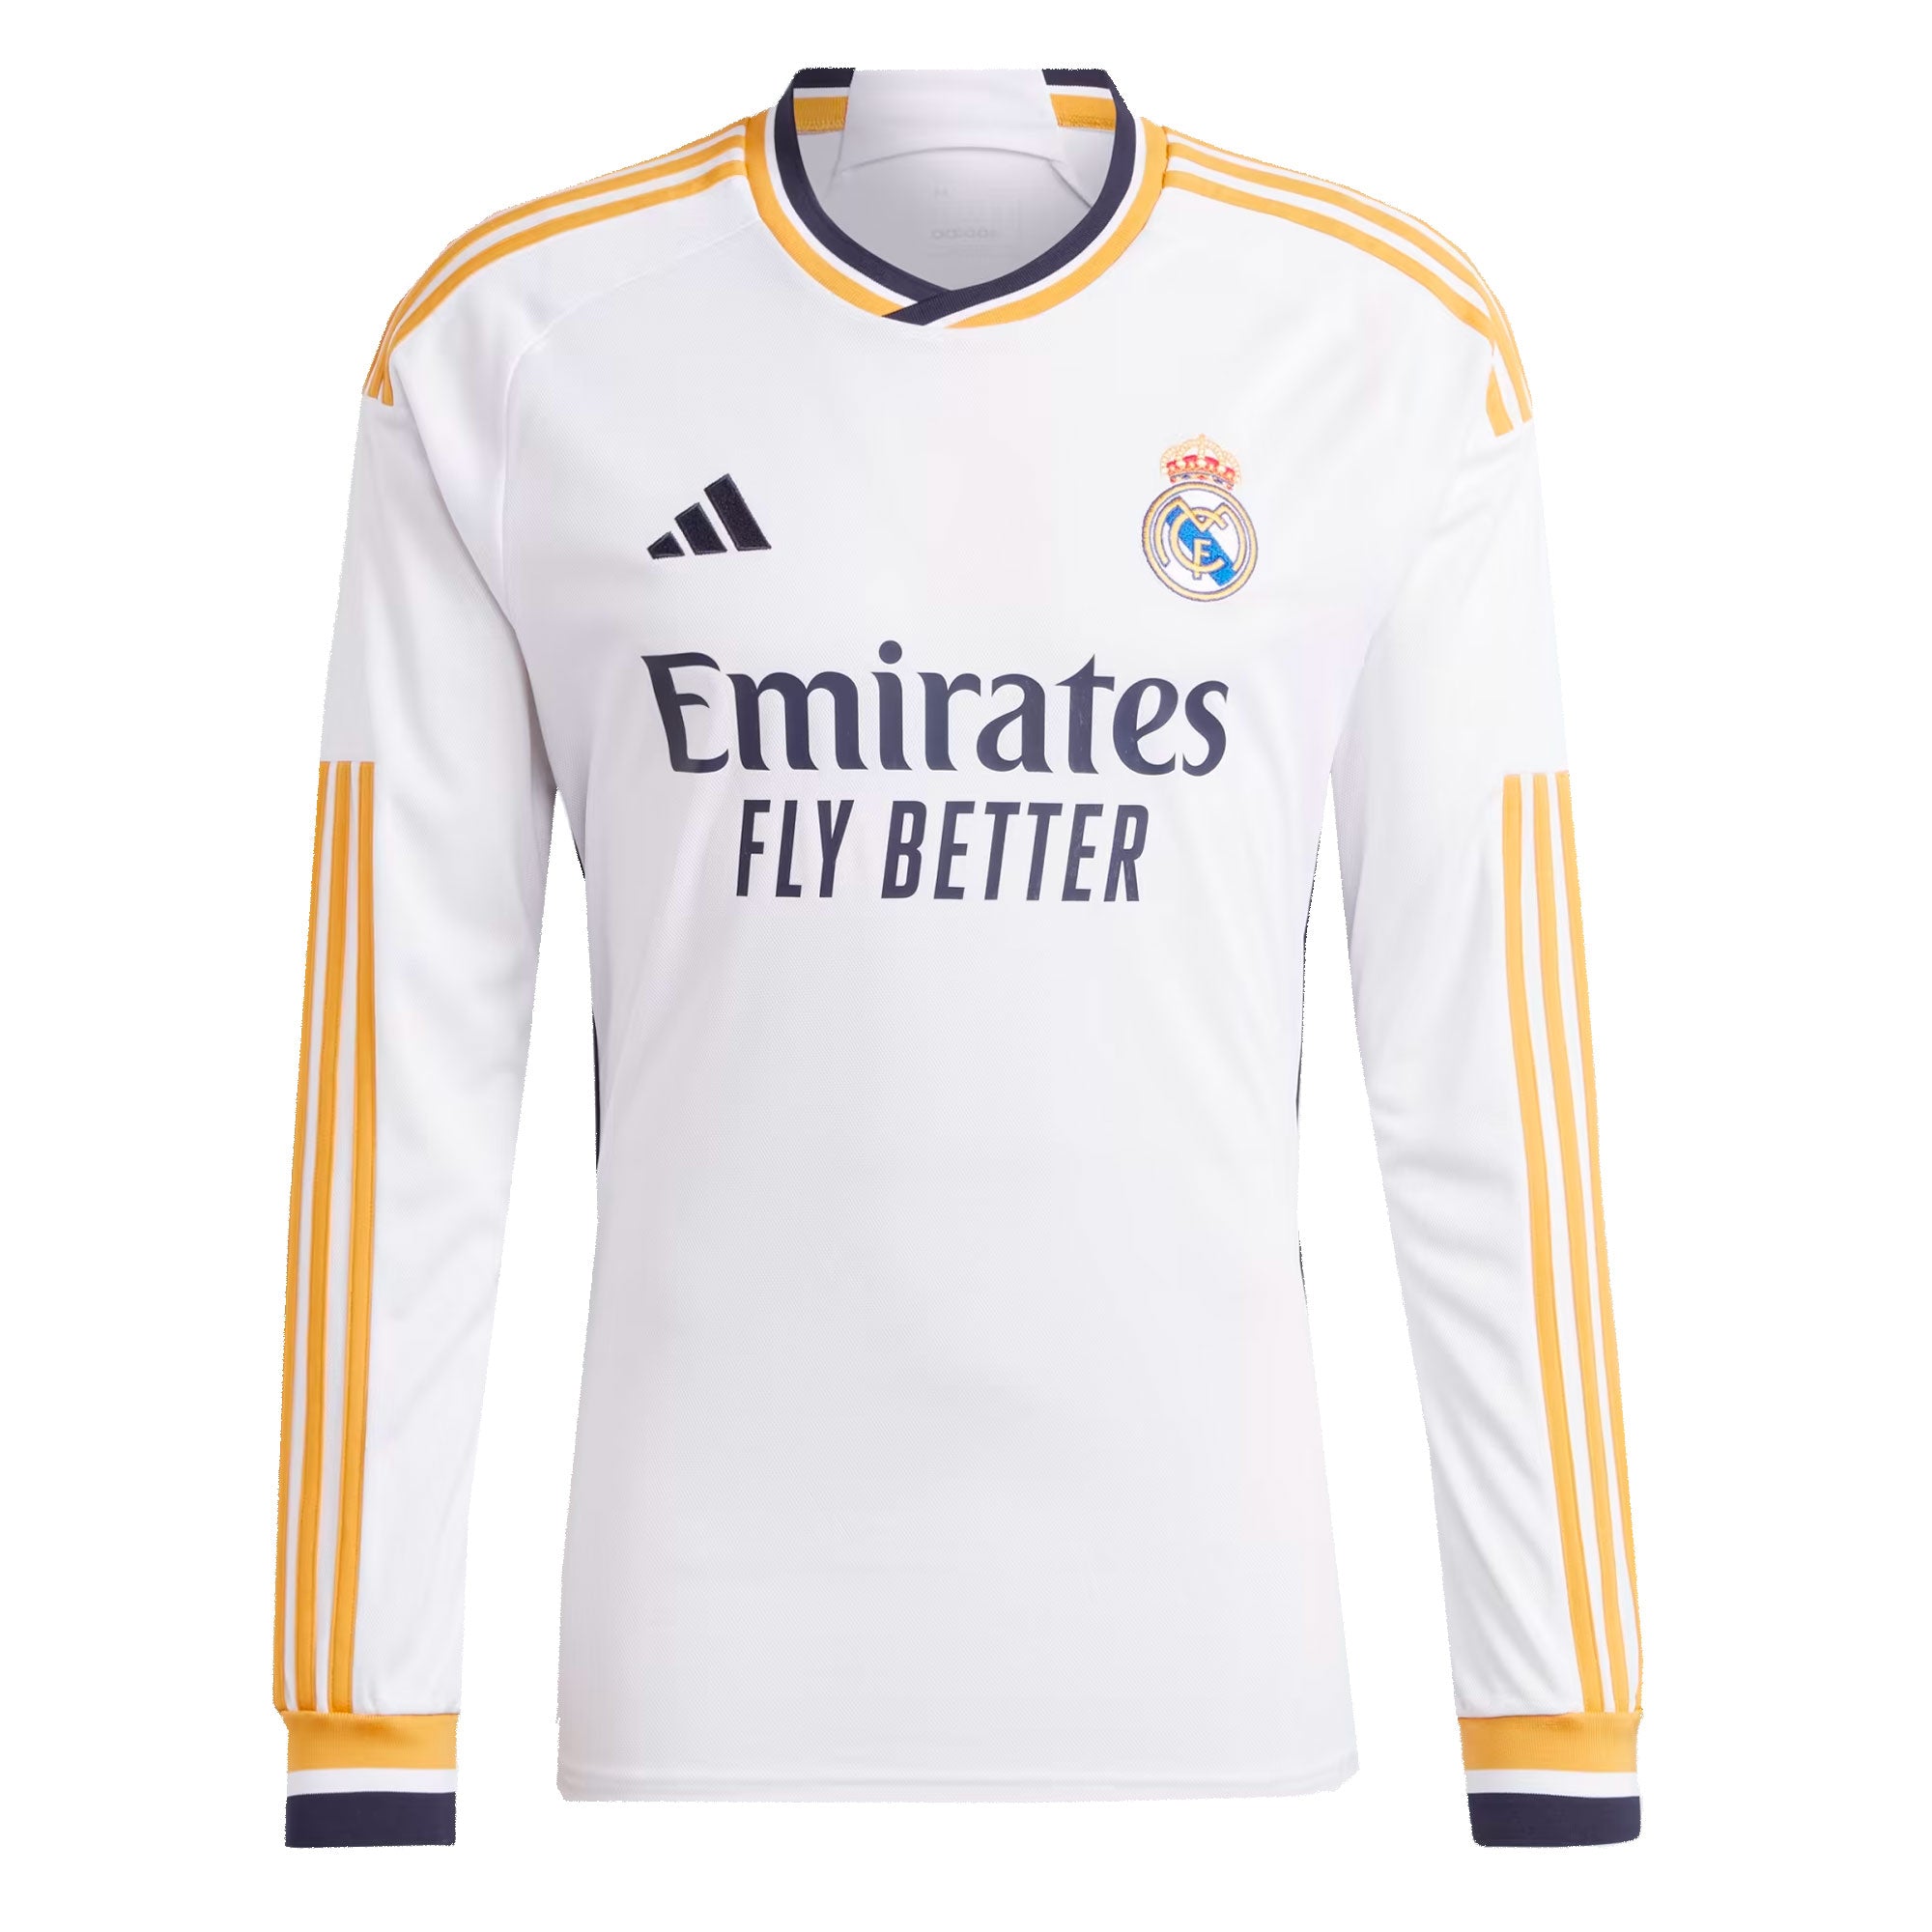 Adidas Fly Emirates Real Madrid 1/4 Button Up Soccer Jersey Size XS